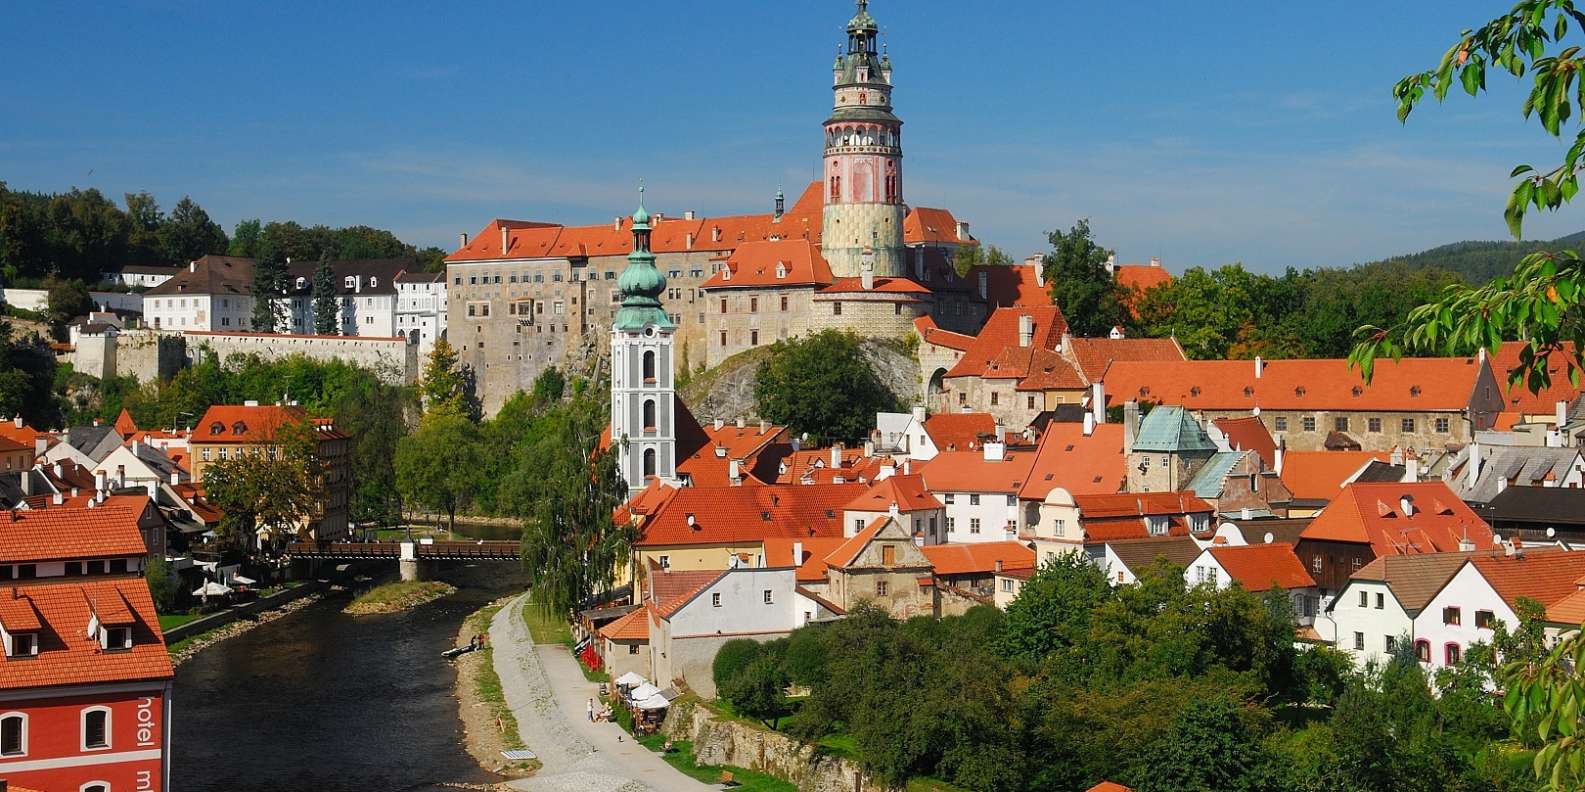 What to do in Passau